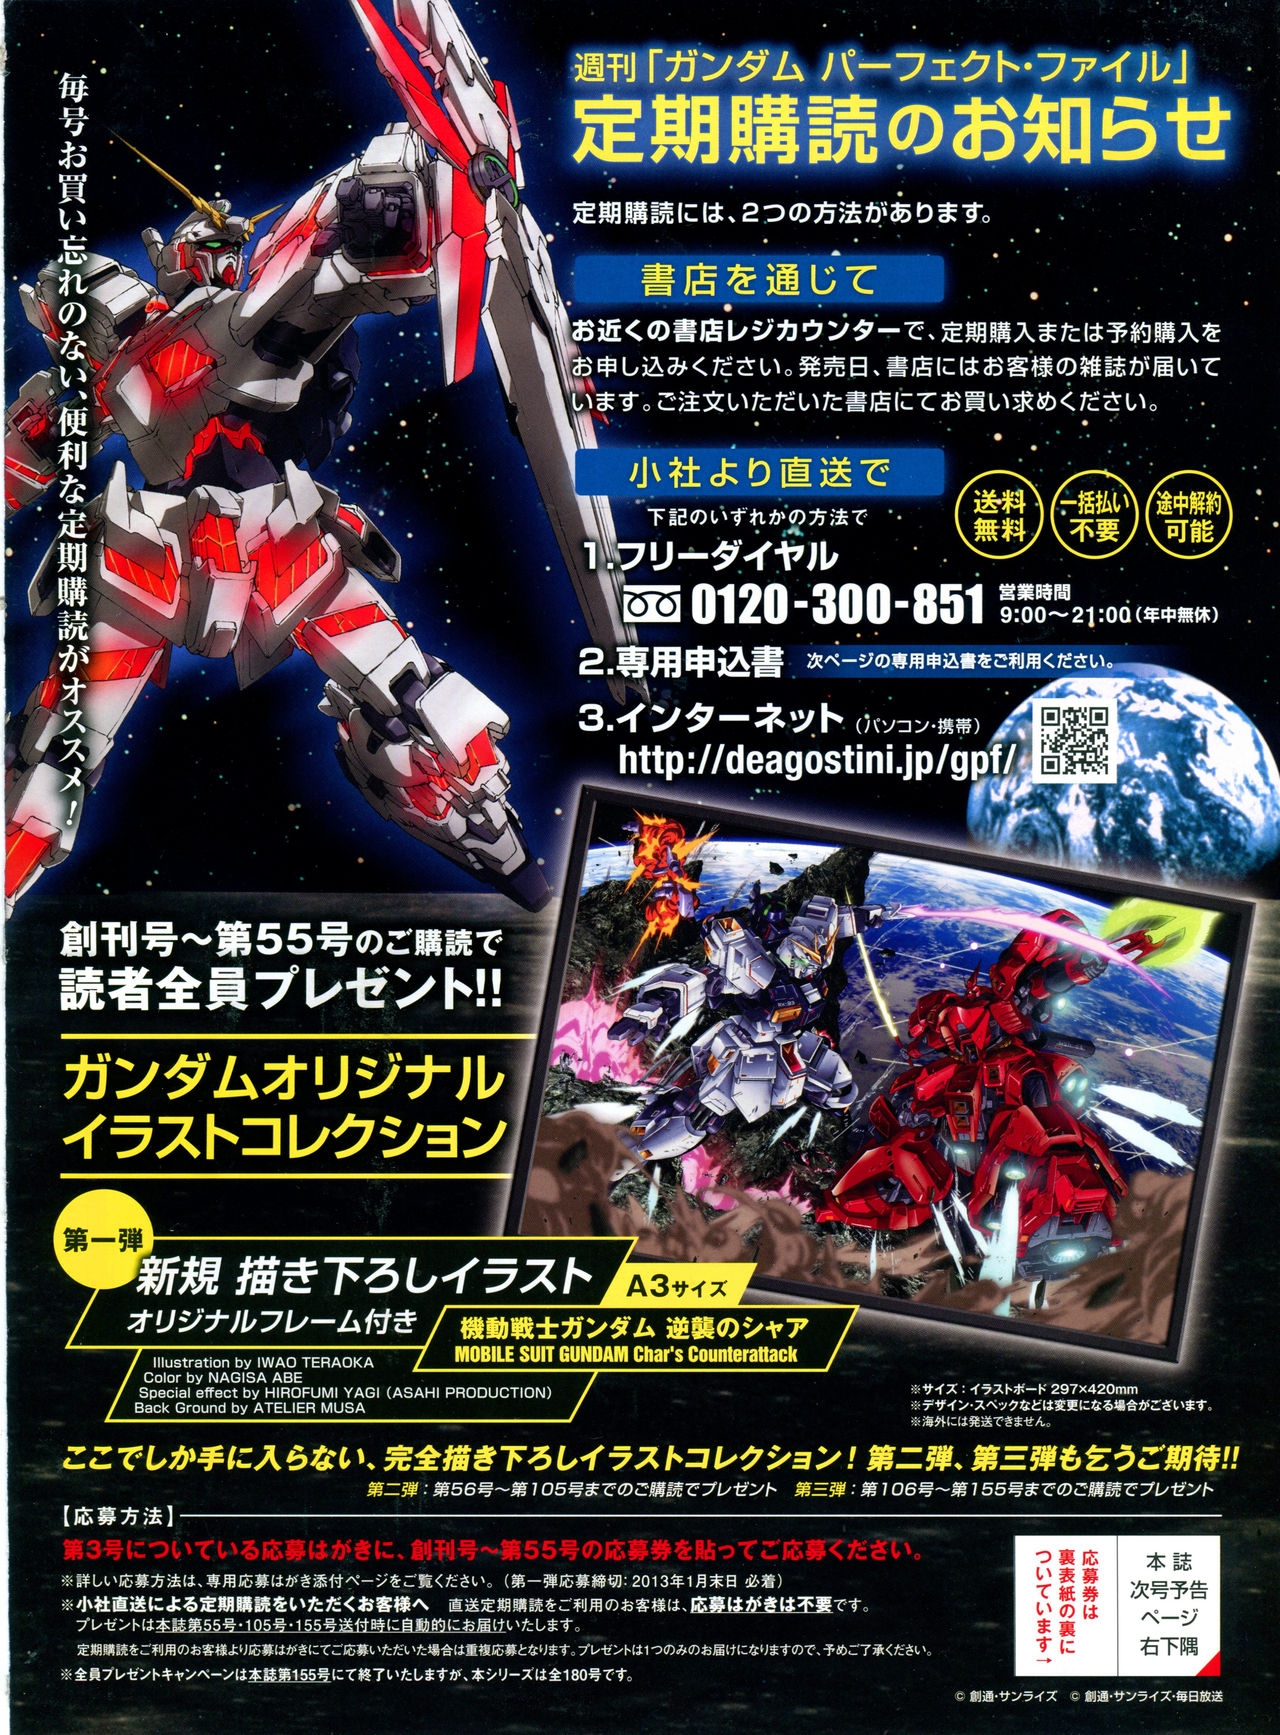 The Official Gundam Perfect File - No. 010 39